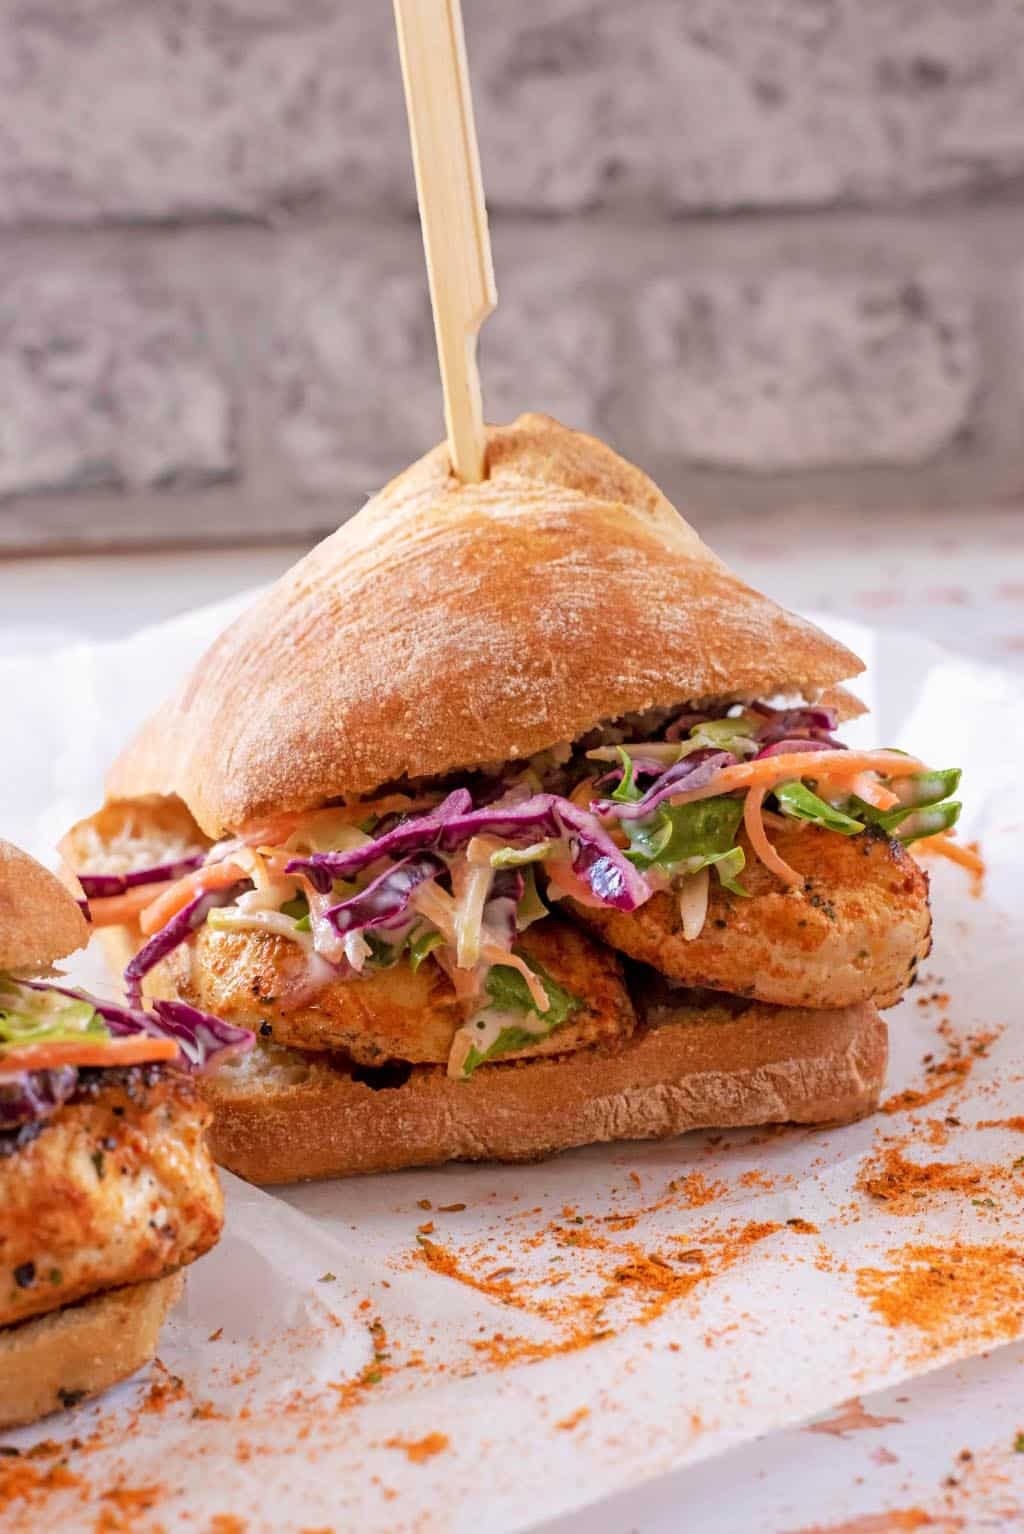 Chicken Burger and slaw in a bun with a wooden skewer through it all